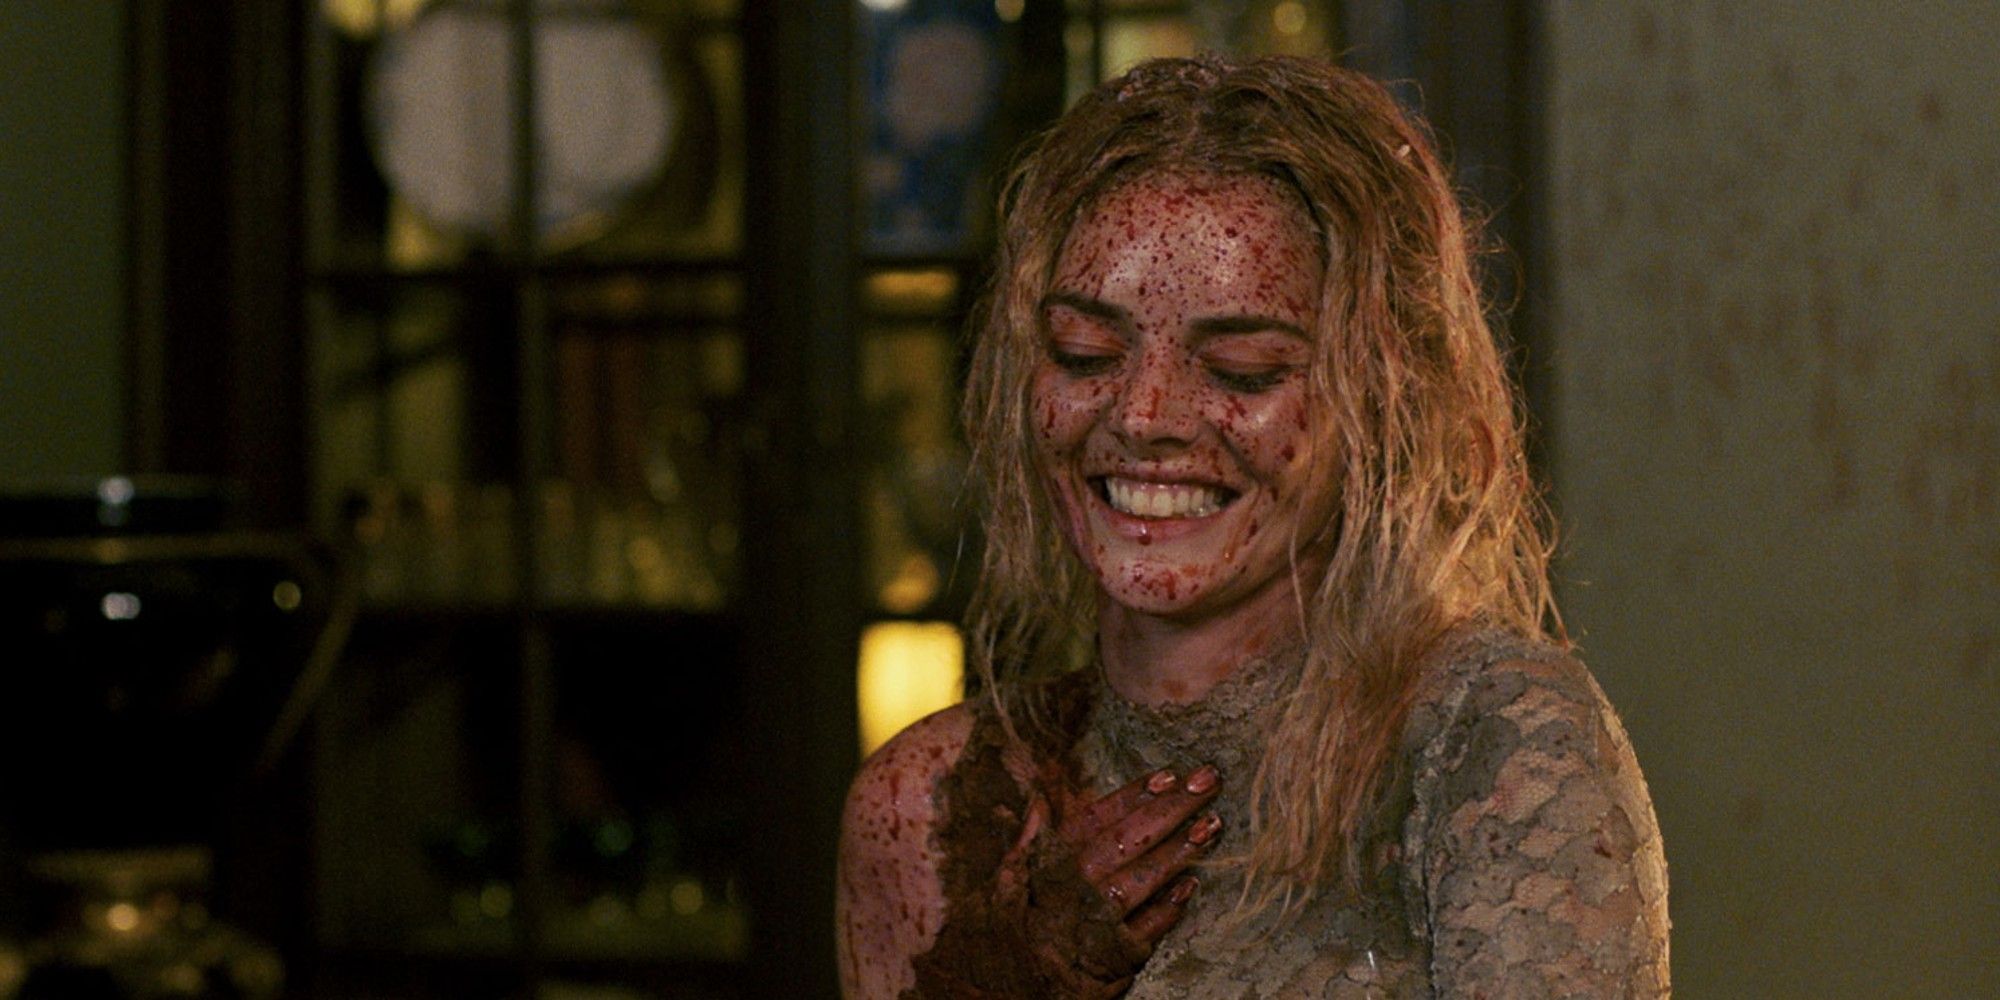 Samara Weavering's character smiling with blood all over her